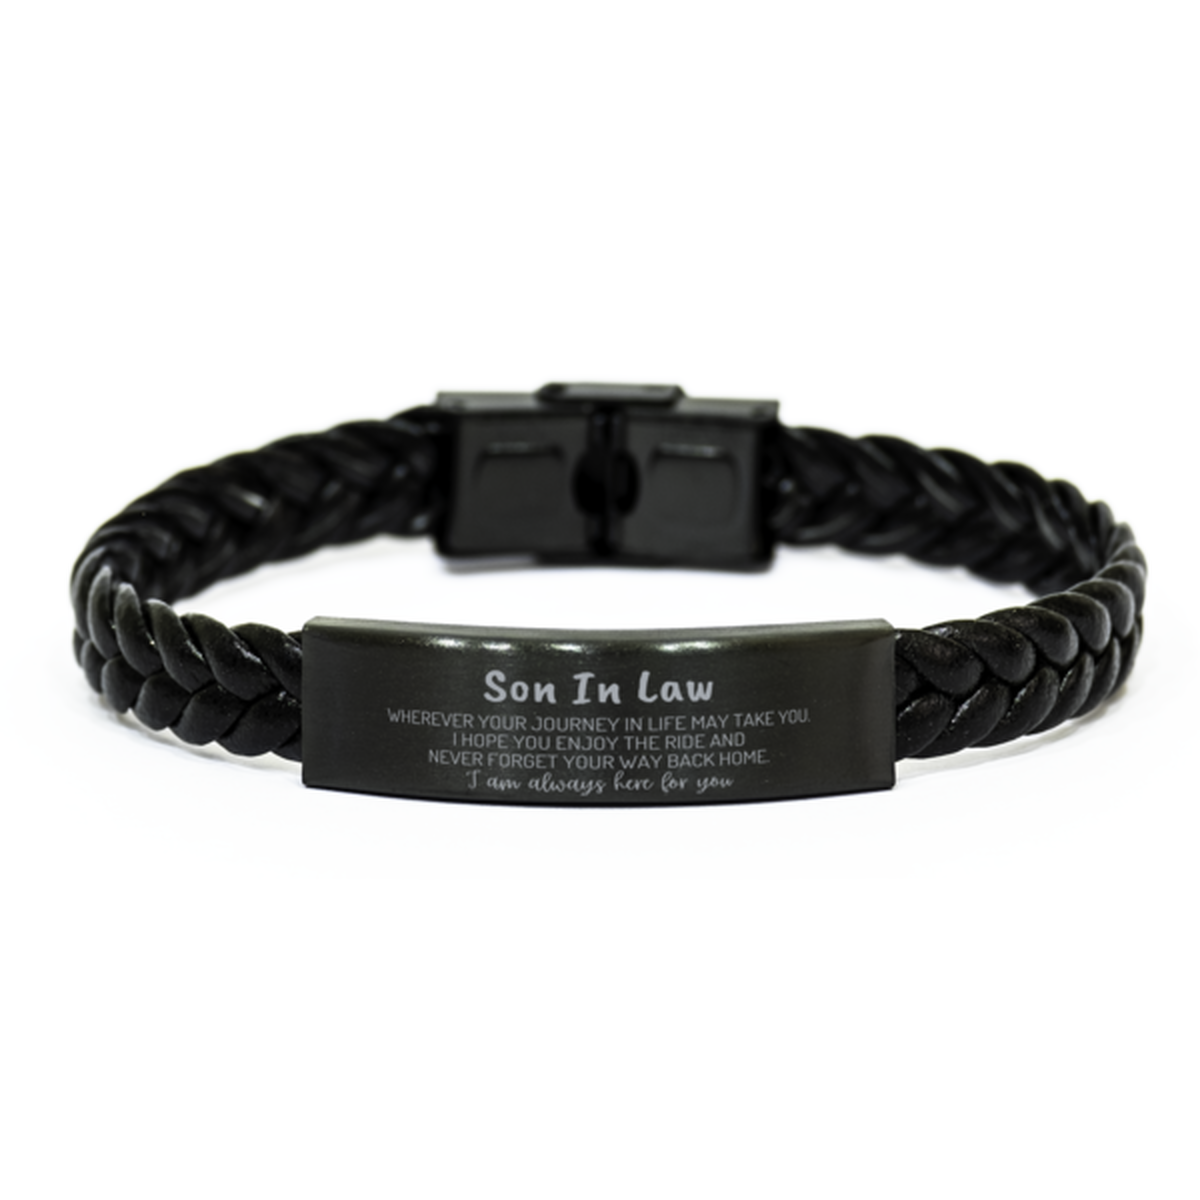 Son In Law wherever your journey in life may take you, I am always here for you Son In Law Braided Leather Bracelet, Awesome Christmas Gifts For Son In Law, Son In Law Birthday Gifts for Men Women Family Loved One